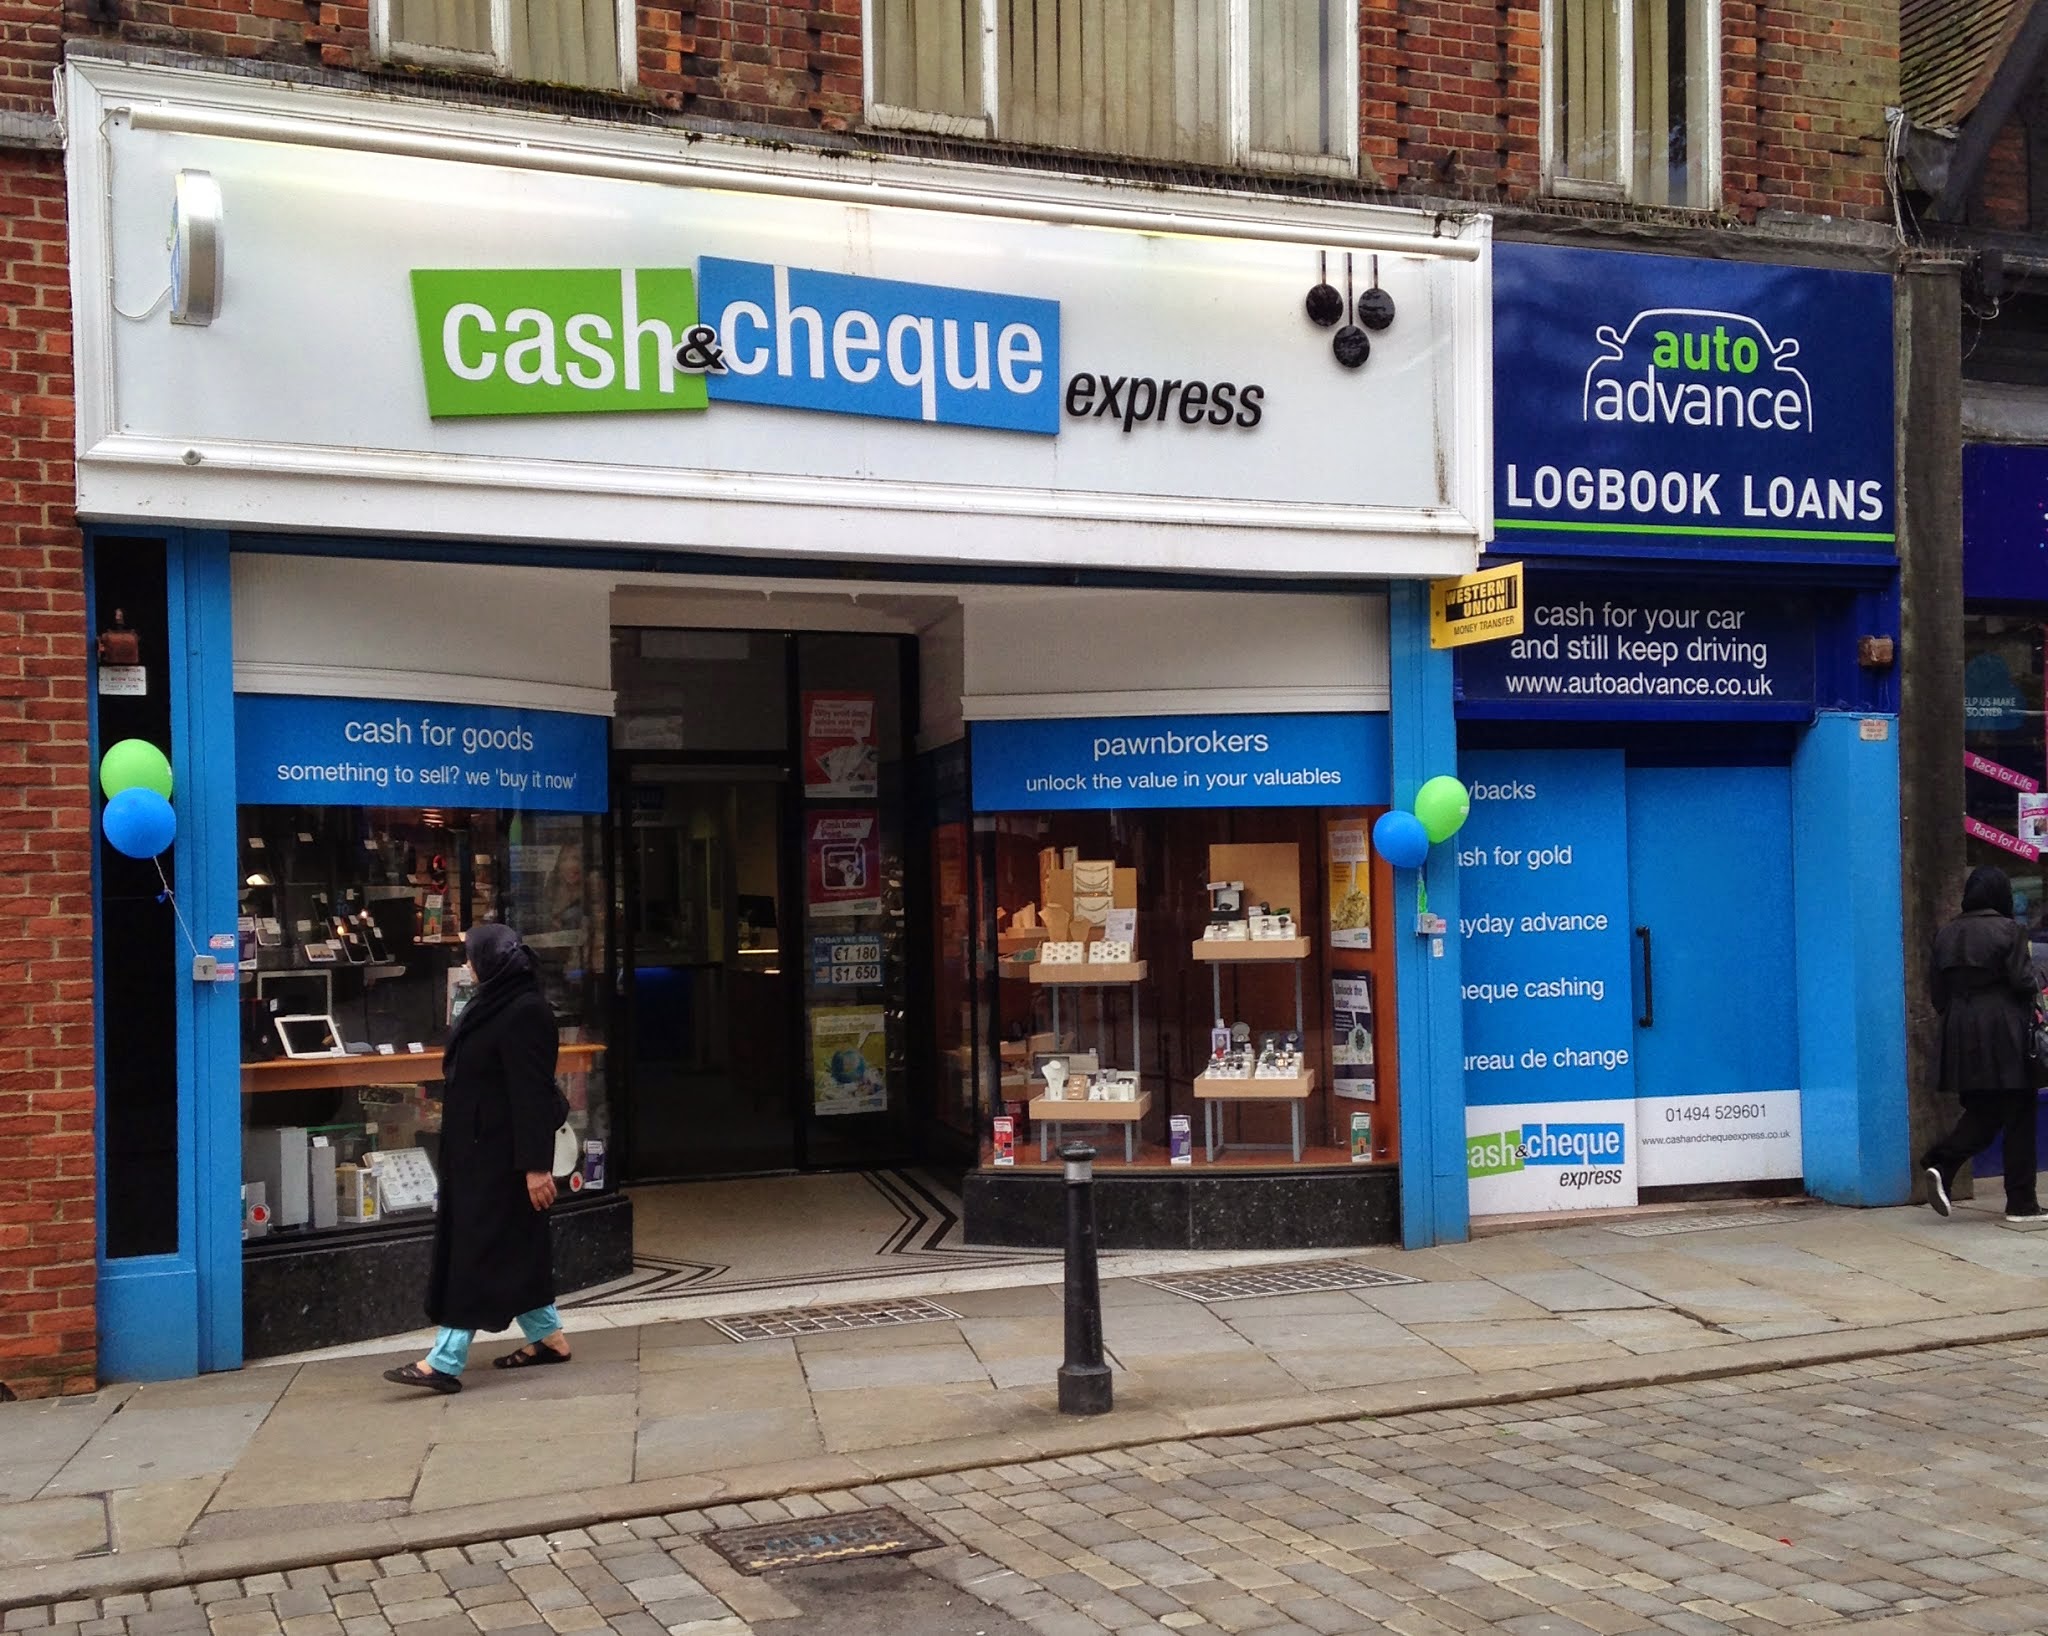 Cash & Cheque Express (High Wycombe) 02